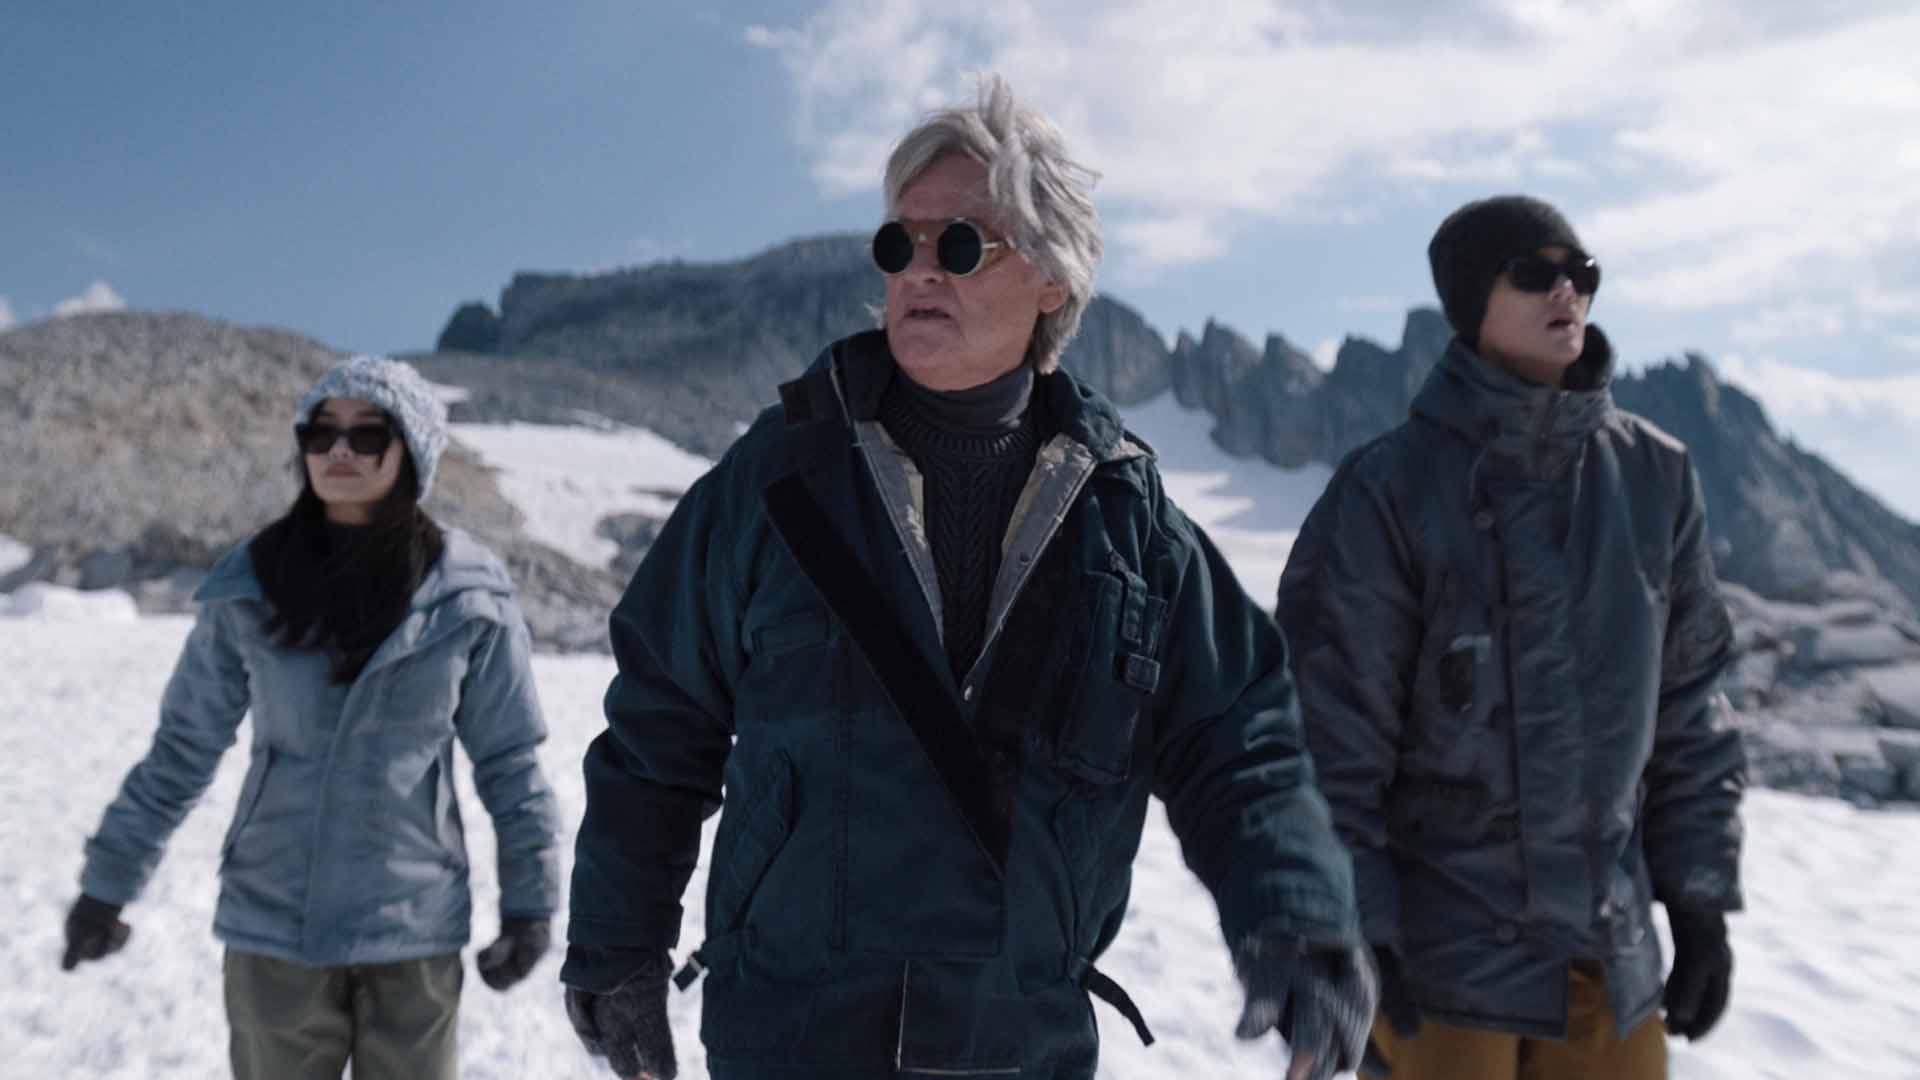 Ice view: Kurt Russell with Anna Sawai and Ren Watabe in the 'Parallels and Interiors' episode, which was filmed on an actual glacier, Mount Breakenridge in British Columbia, Canada. Did shooting the ep bring back memories of filming 1982's The Thing? "Absolutely," said Kurt. "We flew up every day in a helicopter and you put it all together — helicopter, white out, ice, glacier...yeah, it took me back whatever 40 plus years." 

